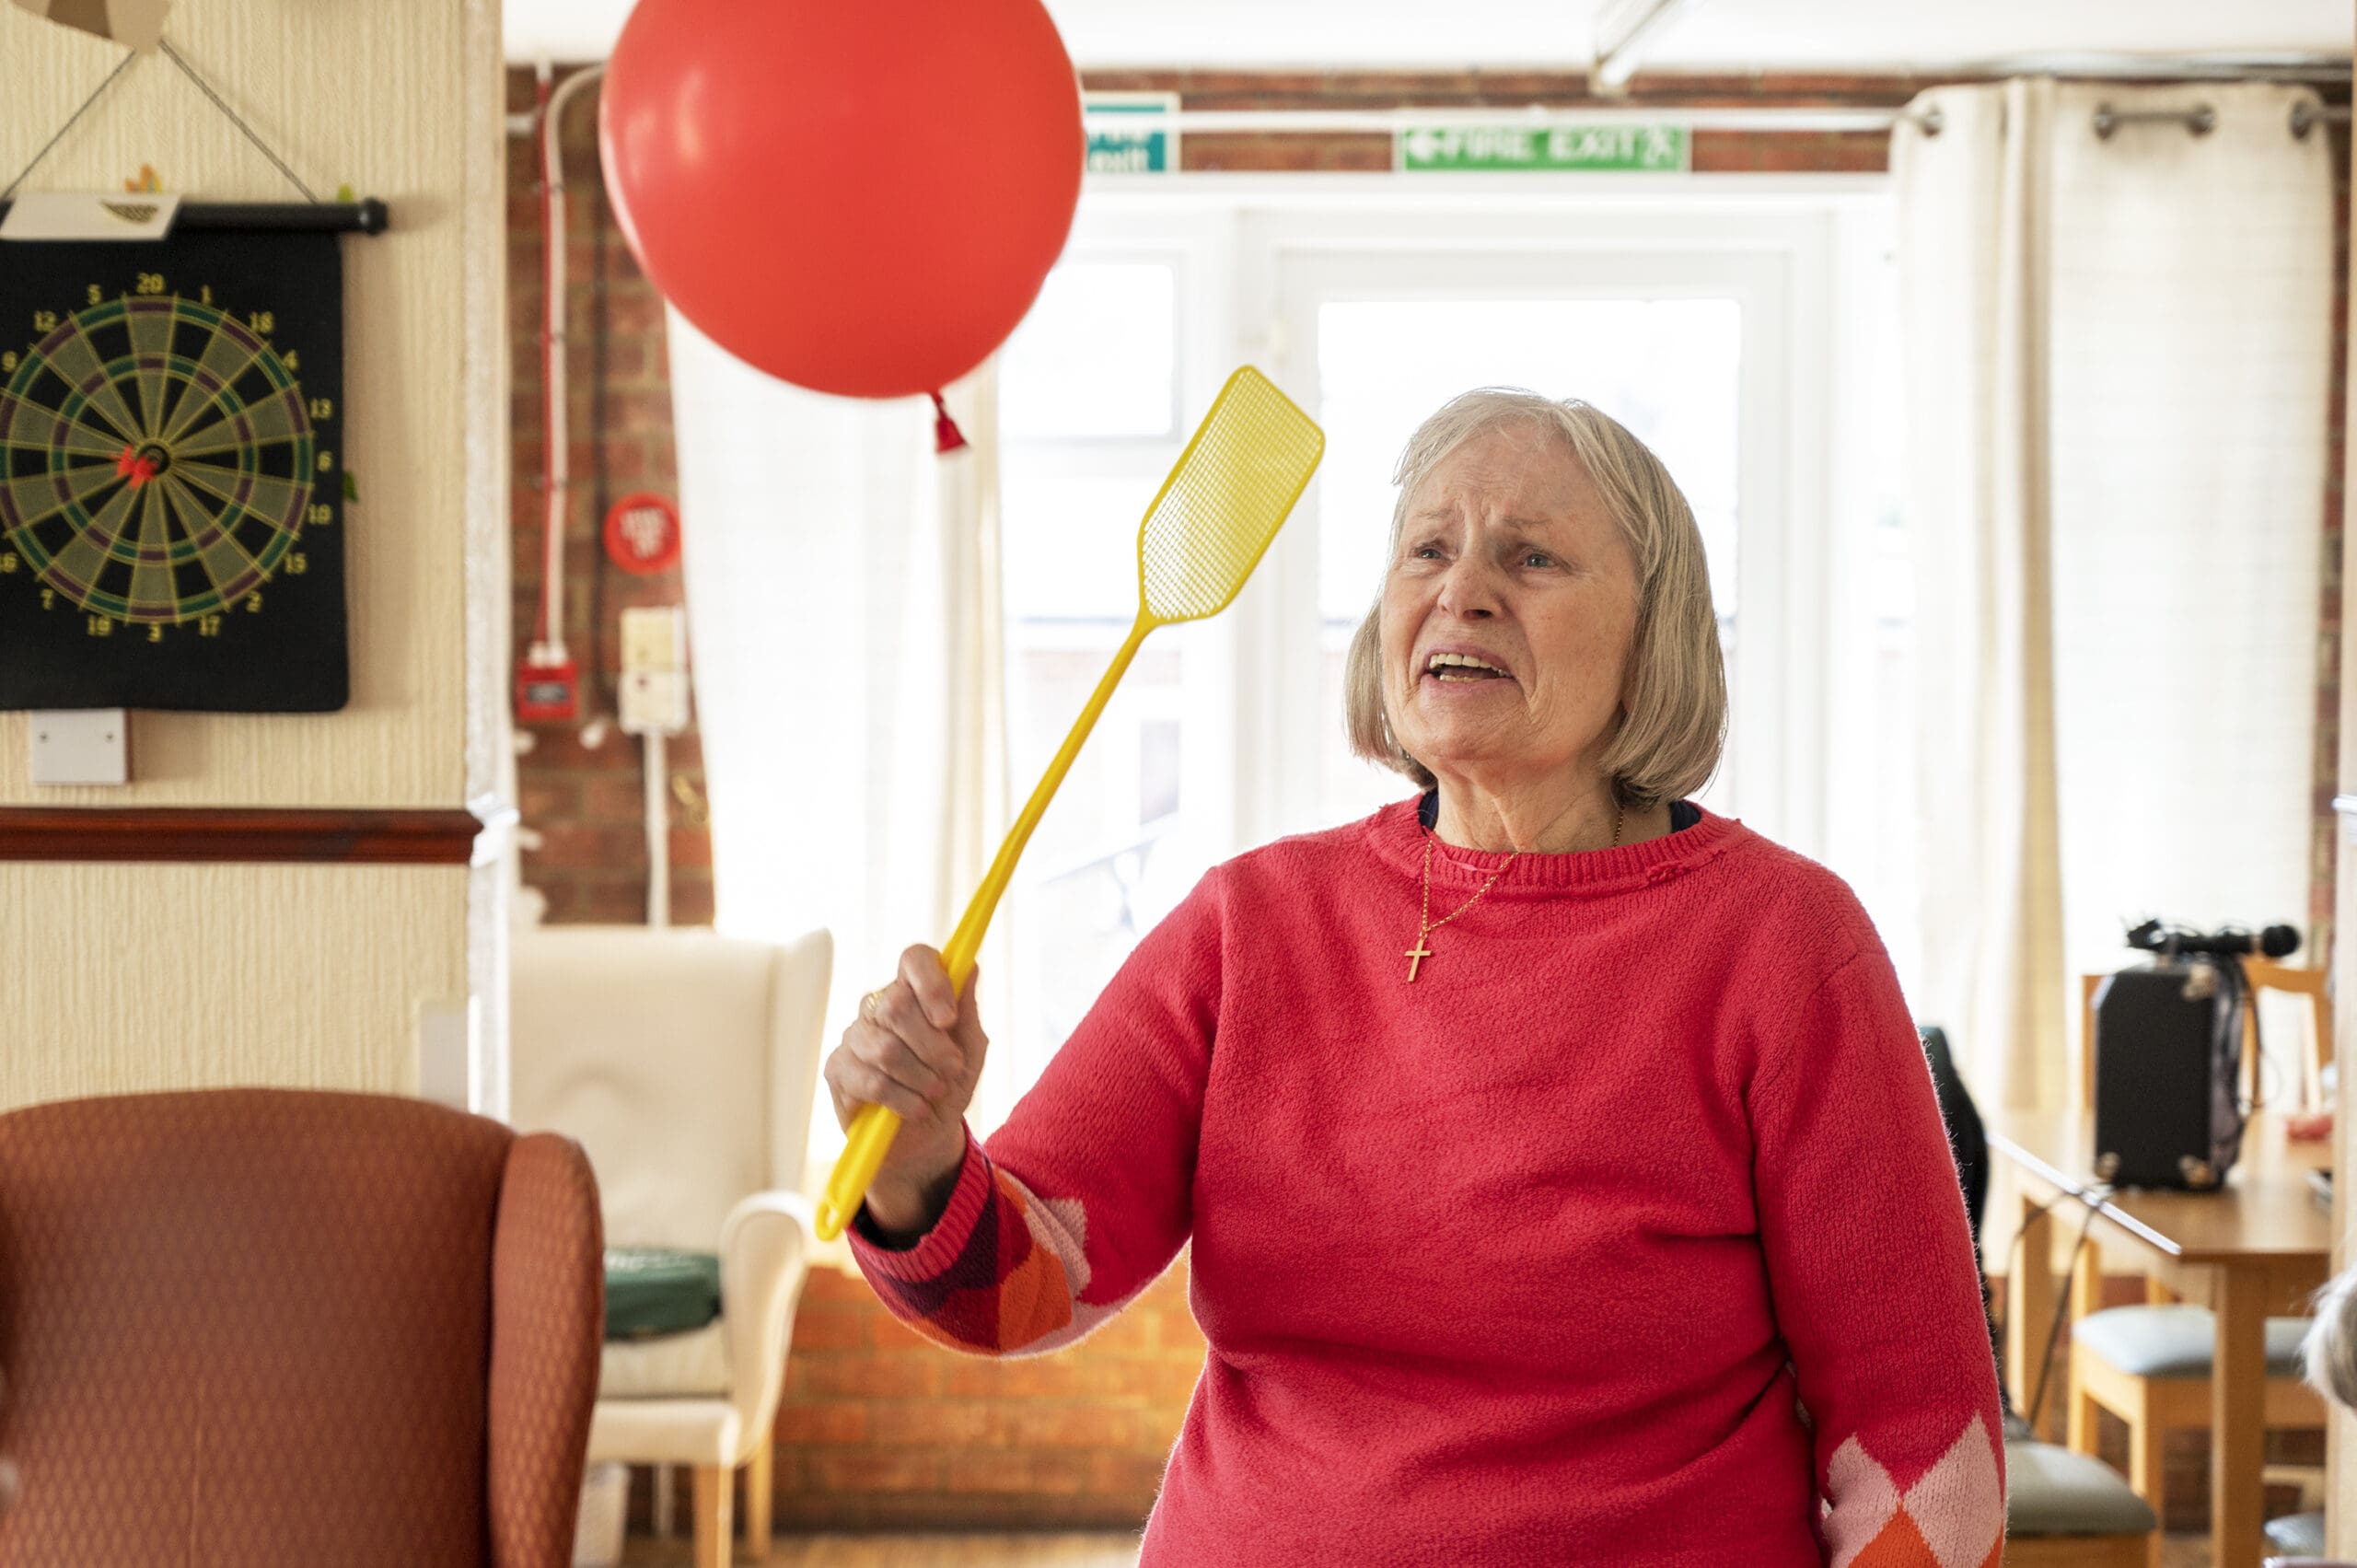 A resident hitting a balloon with a yellow swatter